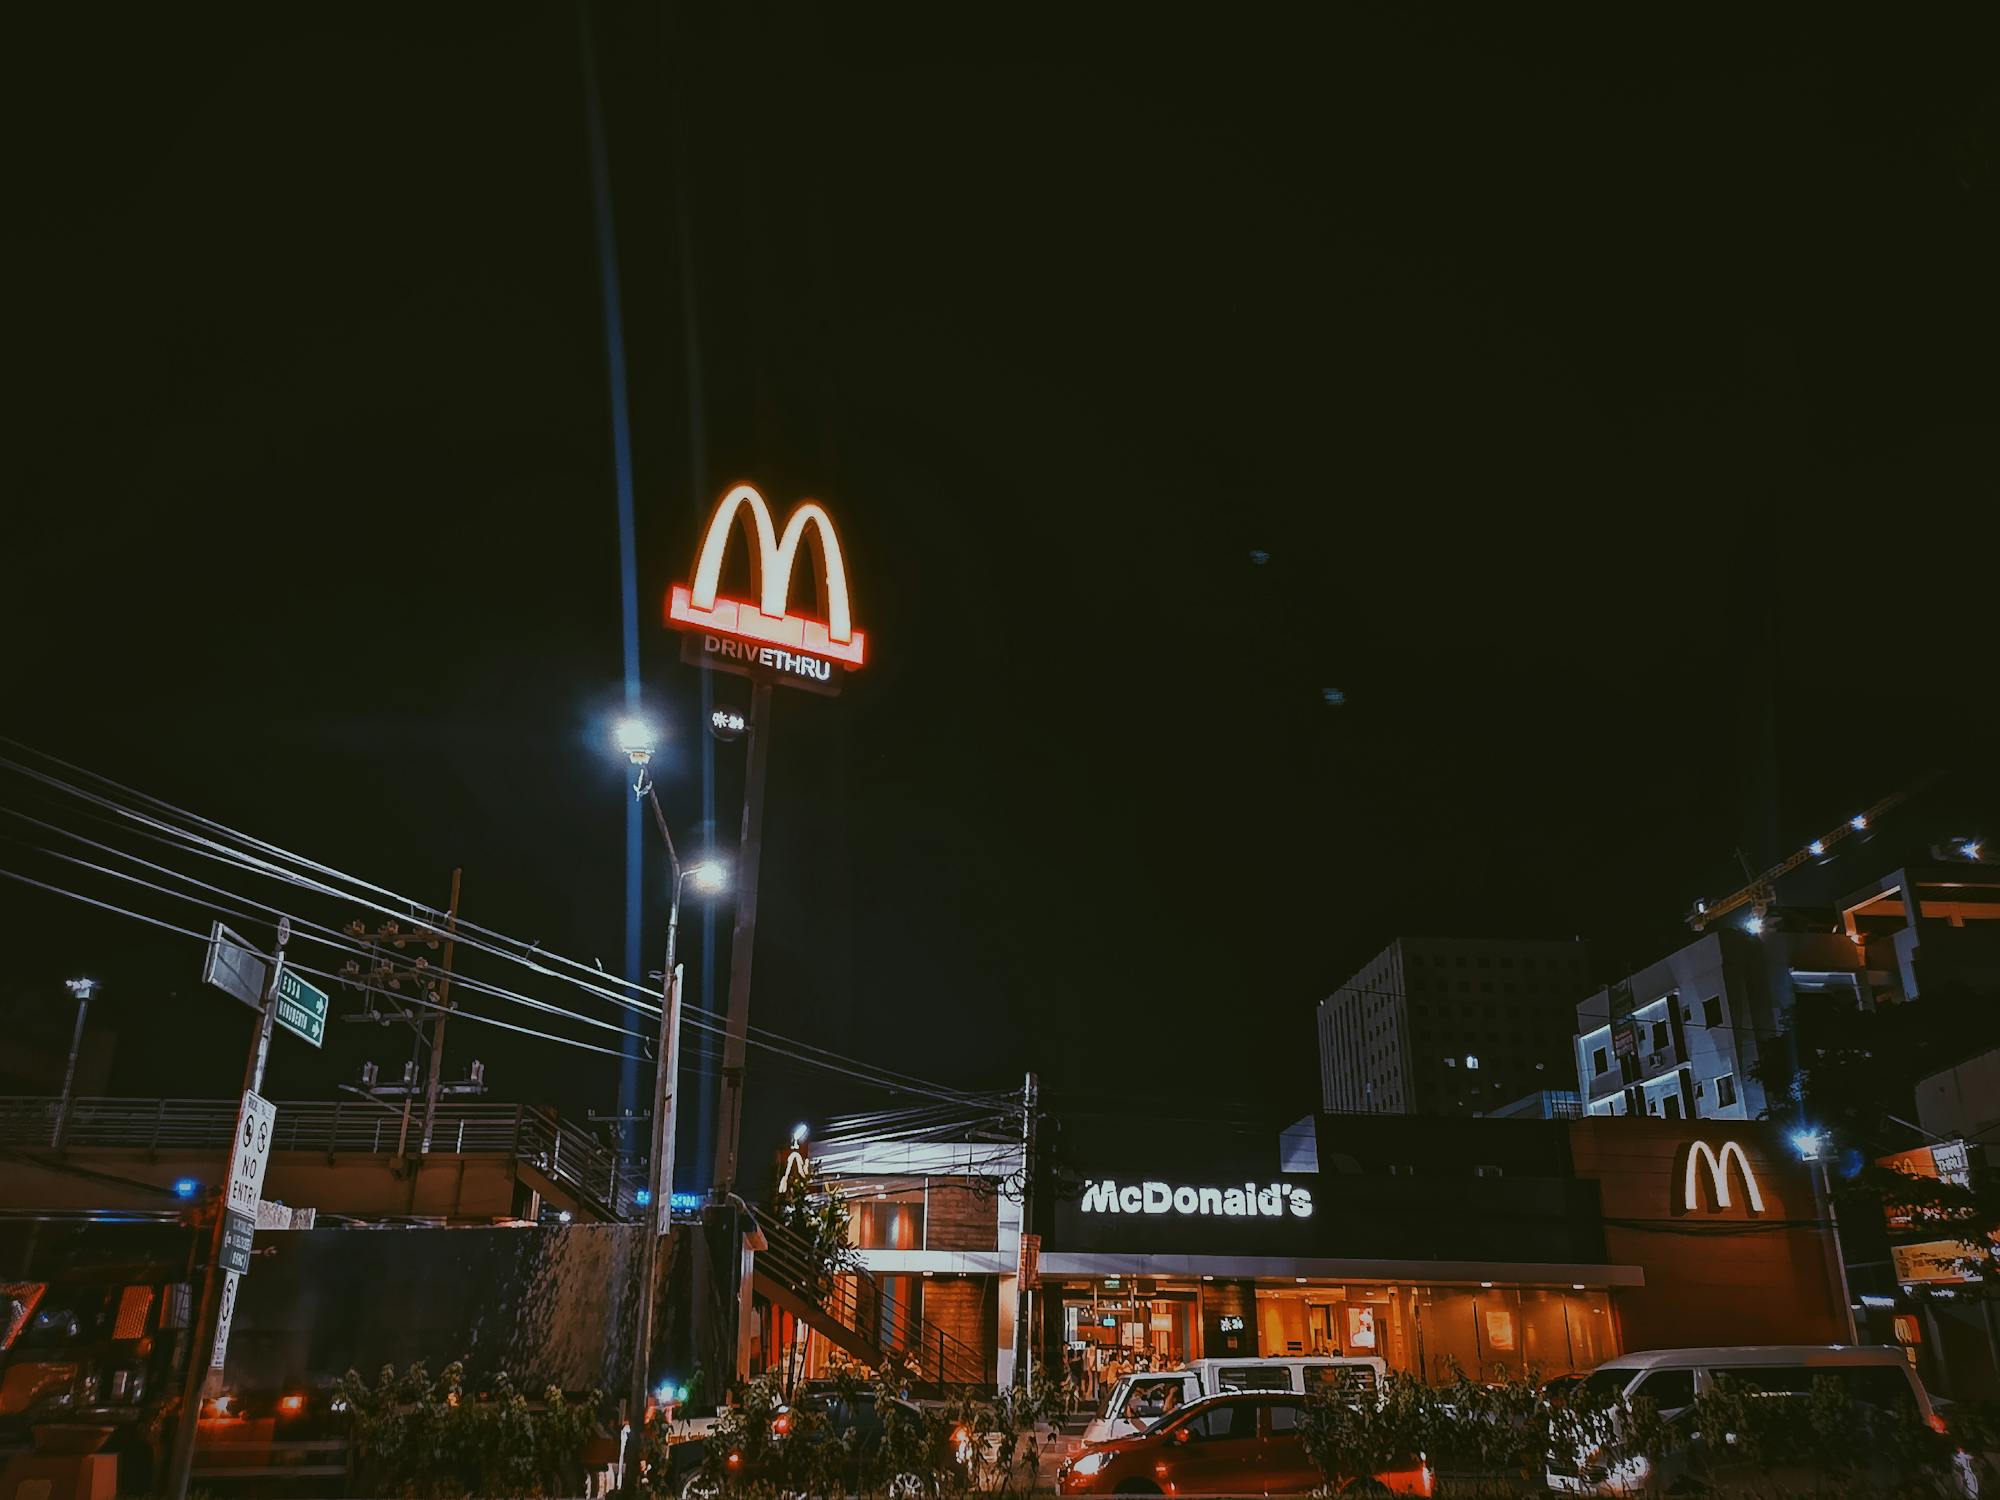 McDonalds Photo by Mikechie Esparagoza from Pexels: https://www.pexels.com/photo/mcdonald-store-at-nigh-time-1656225/